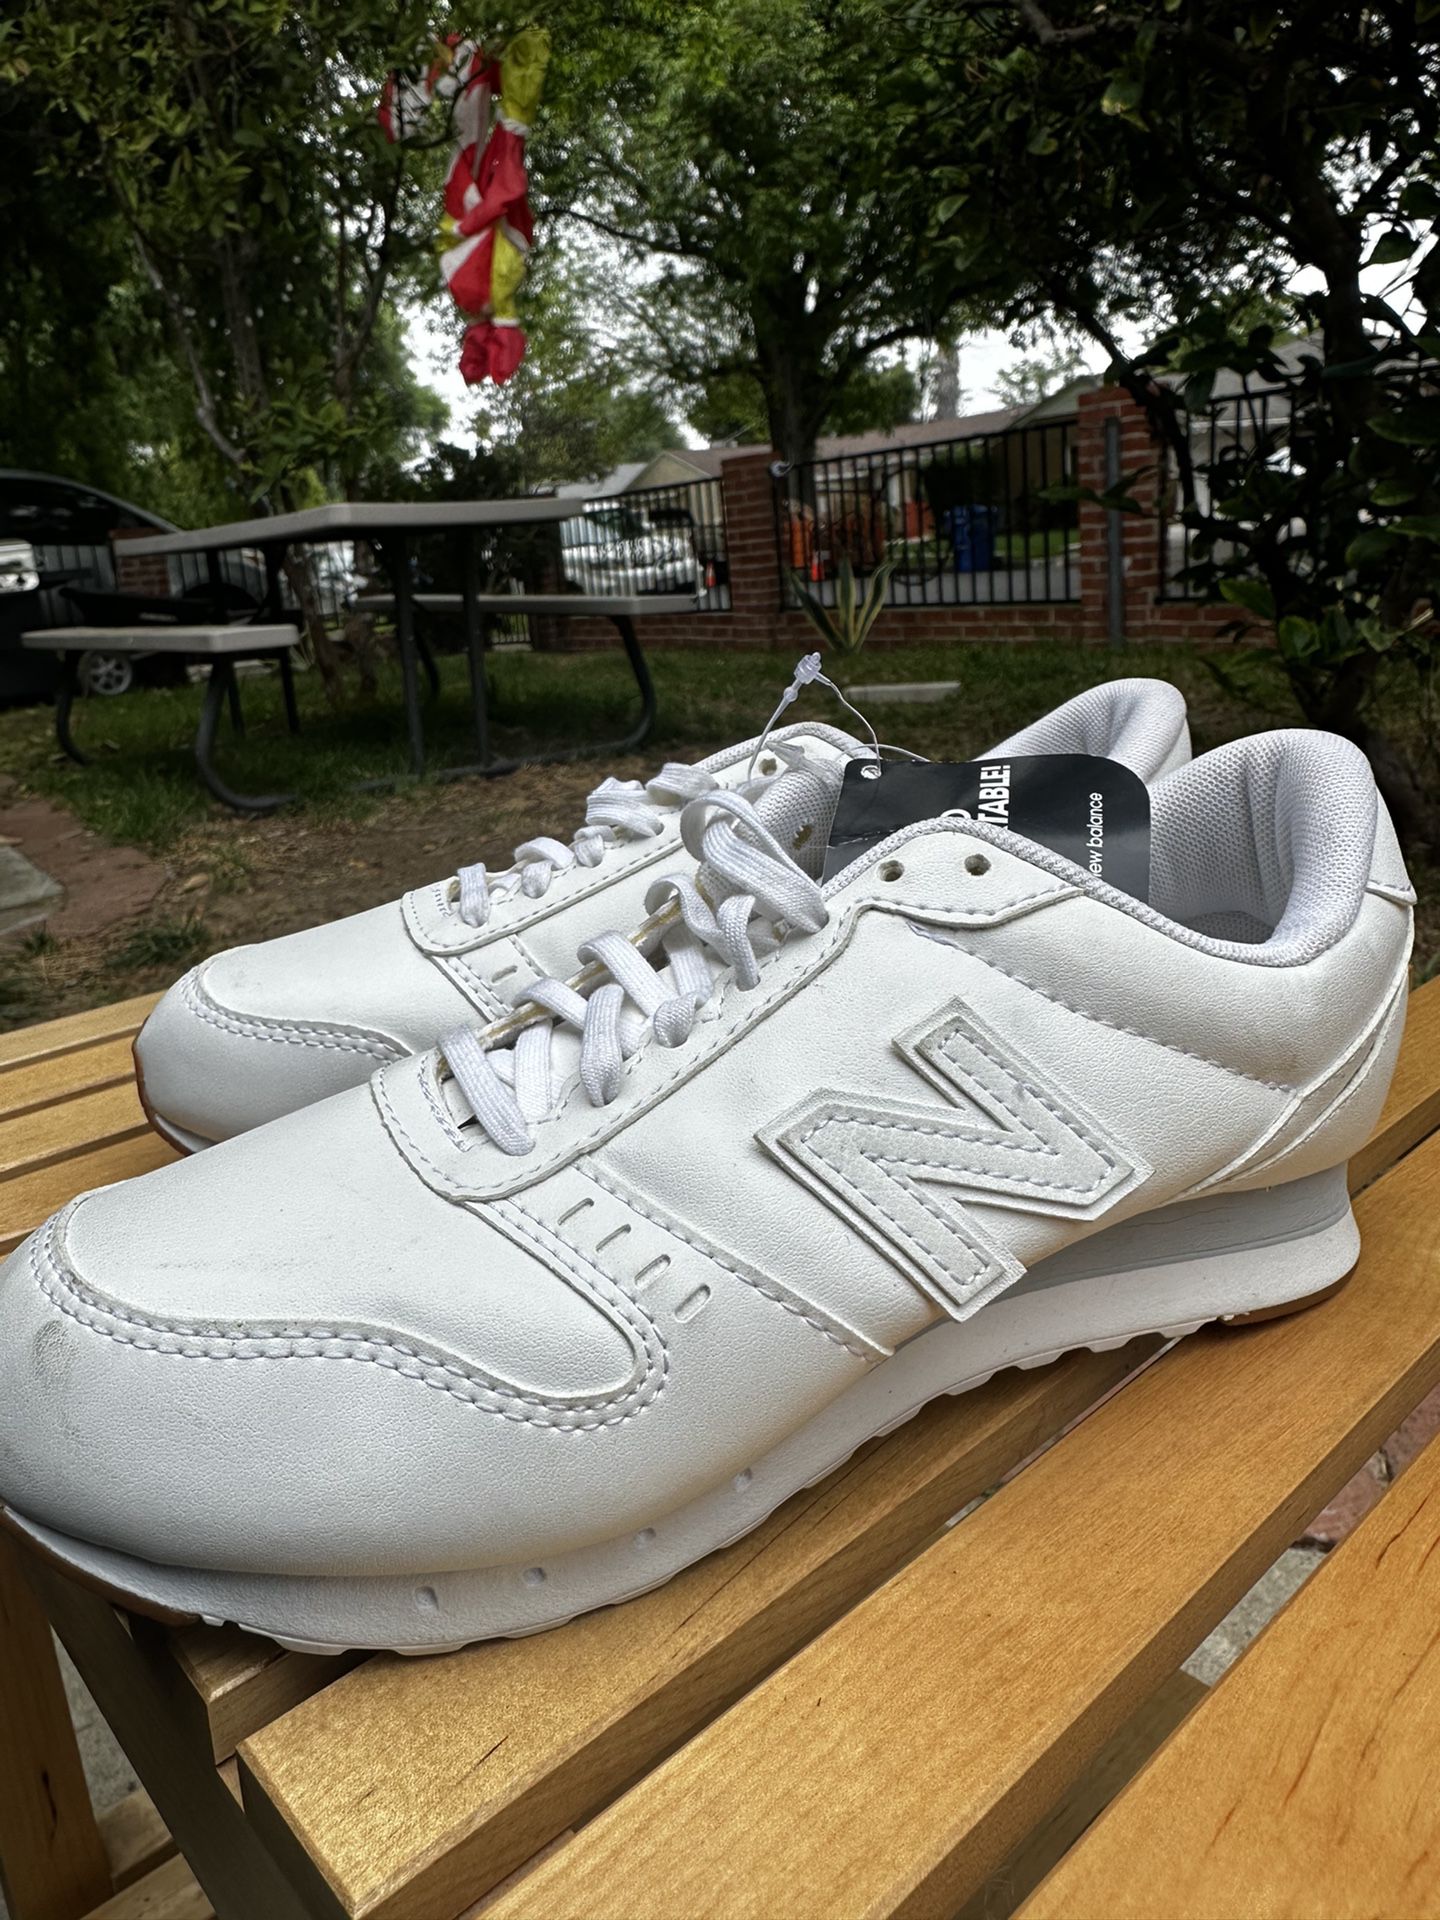 Womens New Balance Sneakers Size 7 